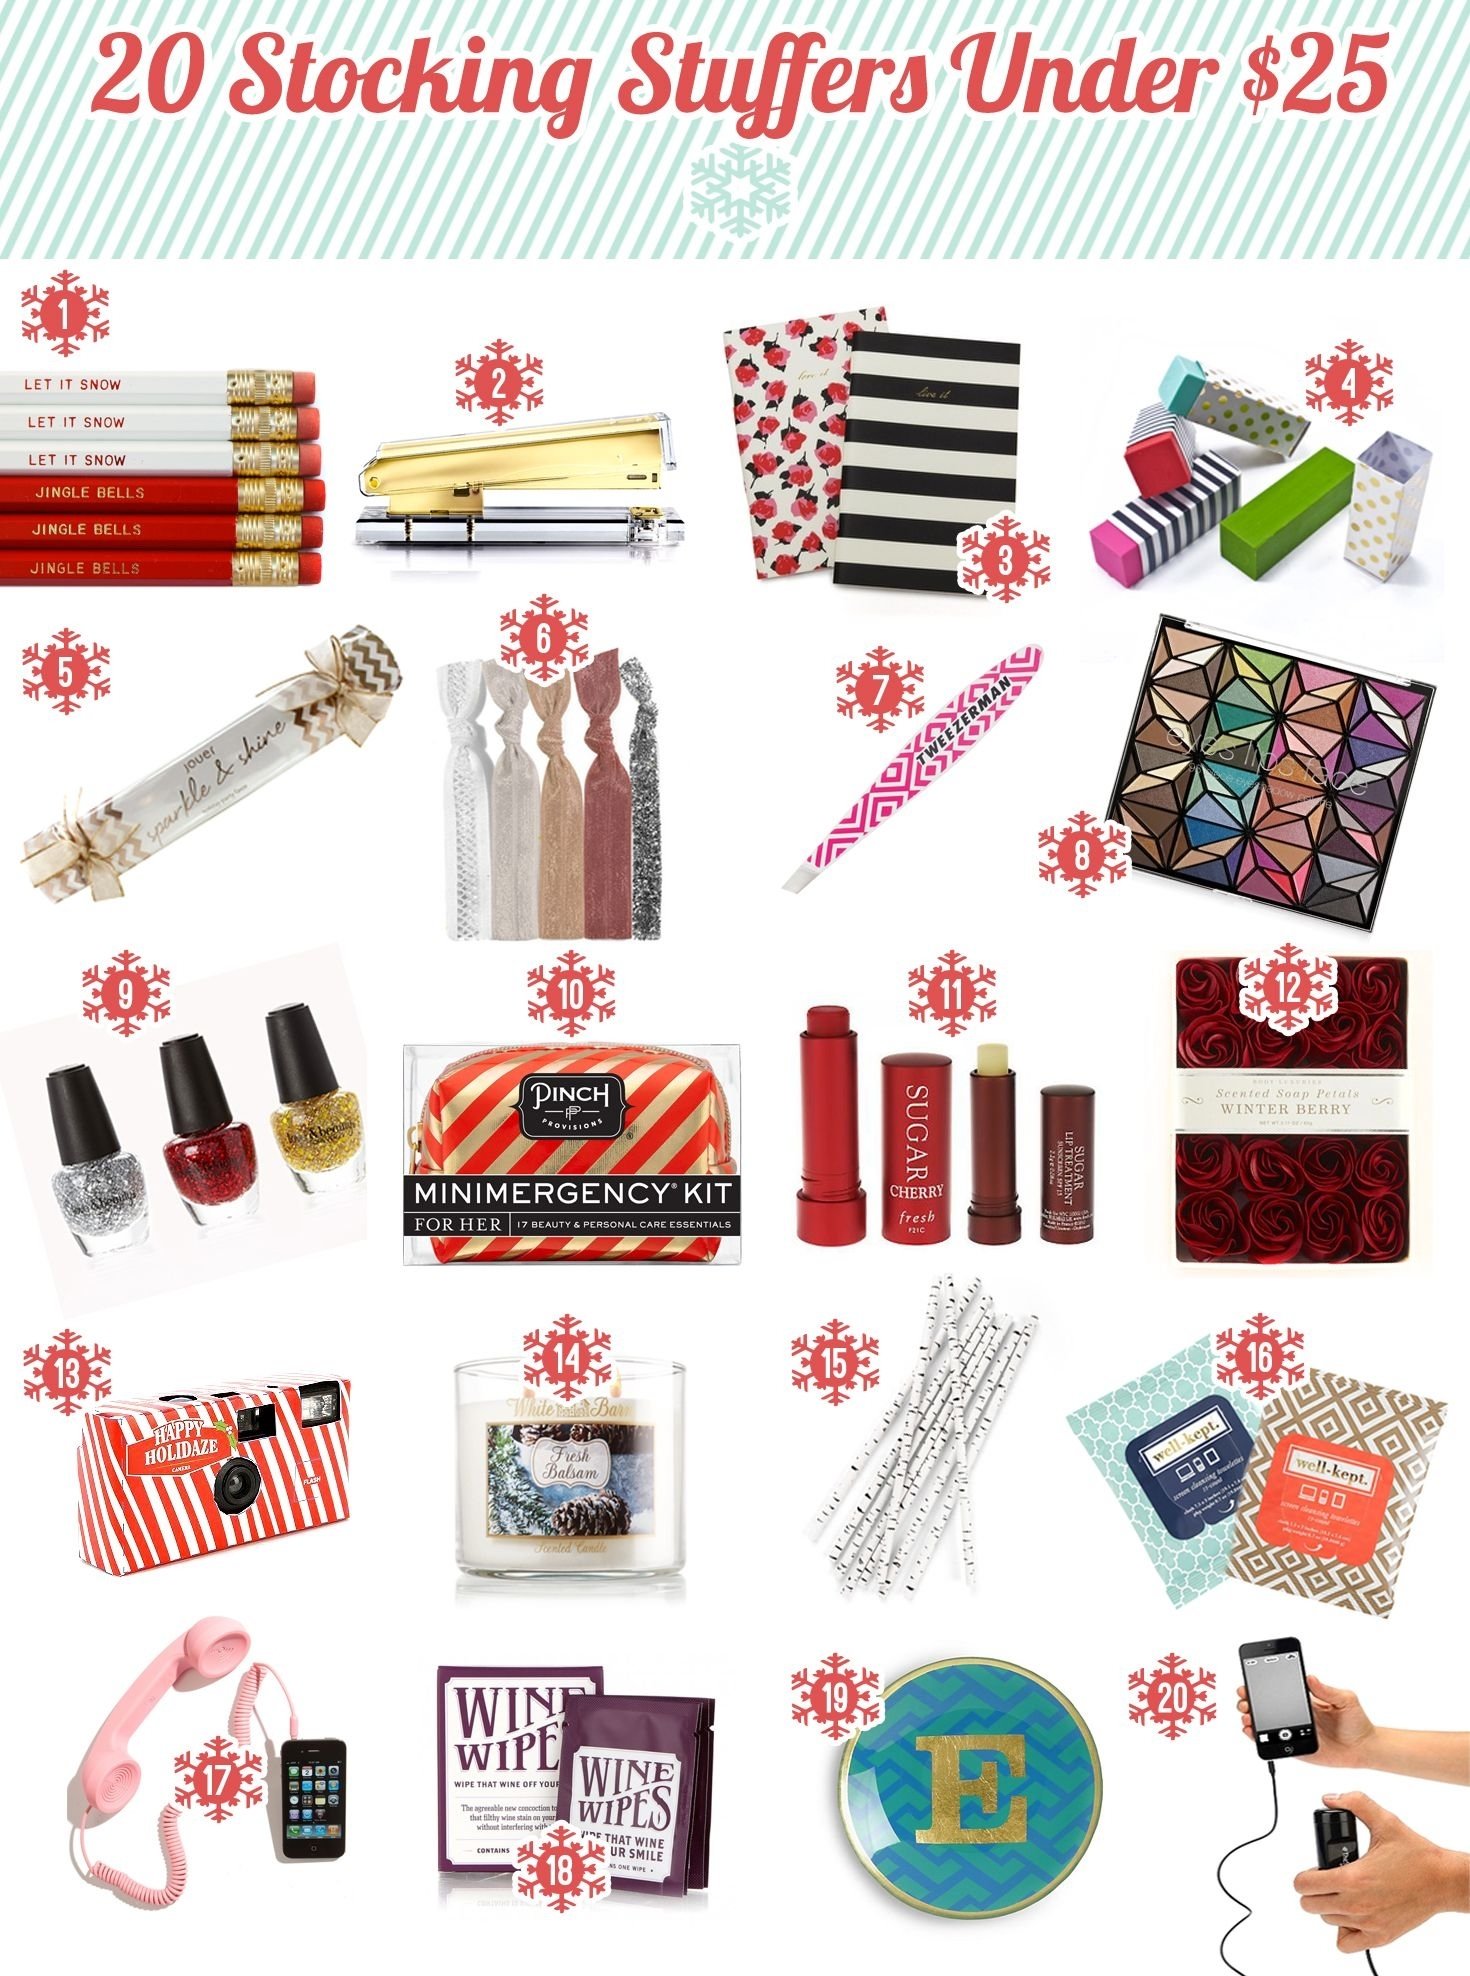 10 Unique Gift Ideas Under 25 Dollars 2013 holiday gift guide secret santa gift ideas under 25 most are 2 2022